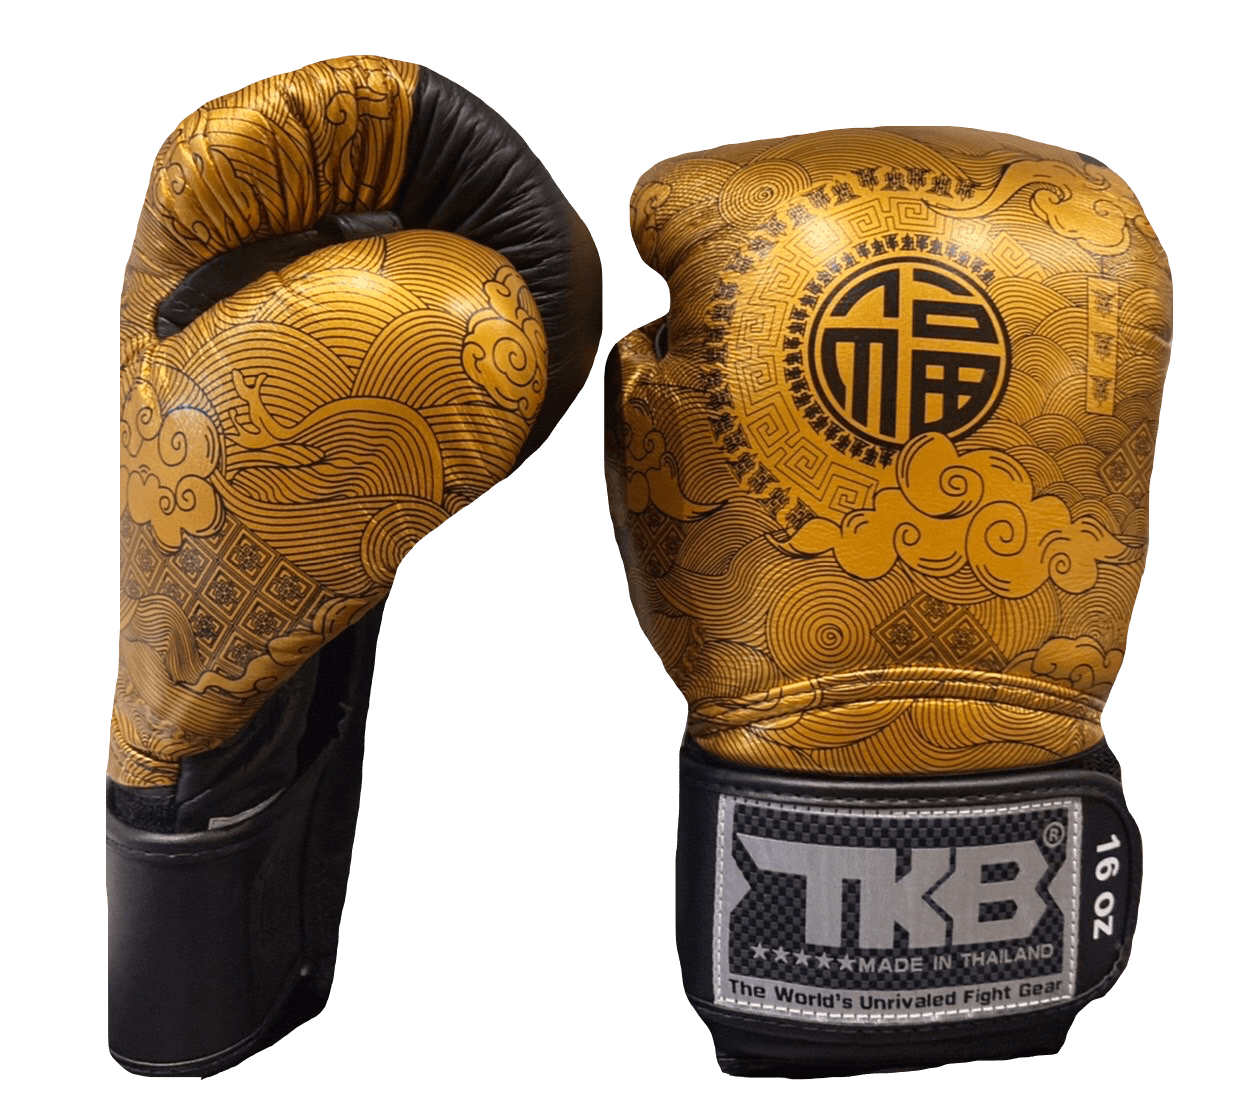 Top King Boxing Gloves TKBGCT-CN01 Black with "FOOK" & "DOUBLE HAPPINESS" Top King